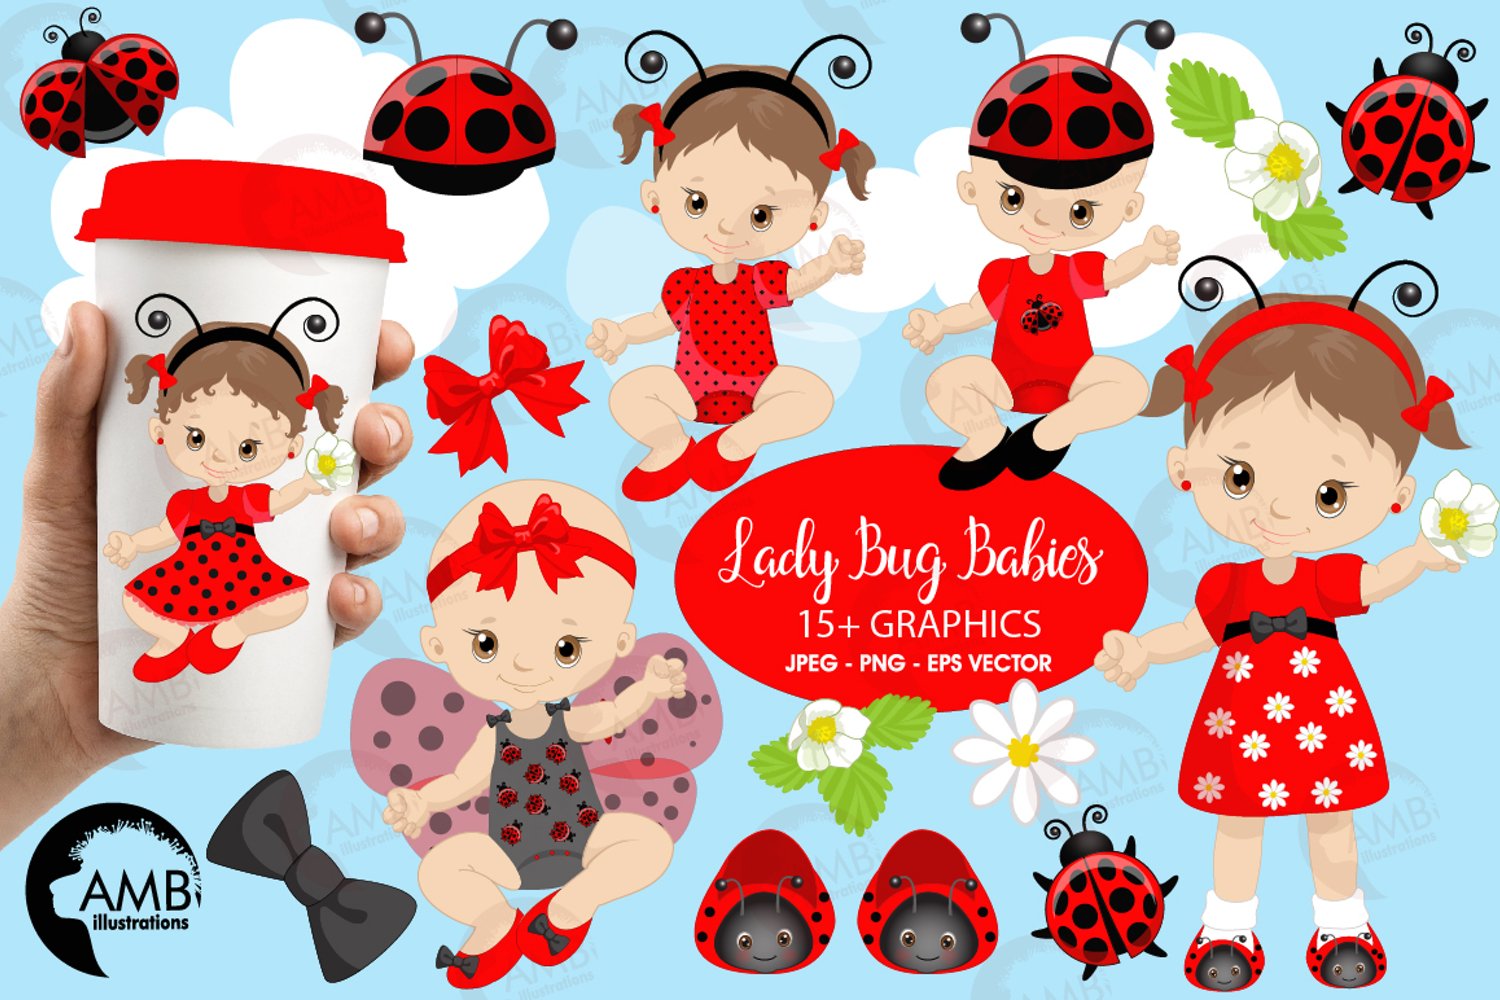 Cover image of Ladybug Babies Clipart.